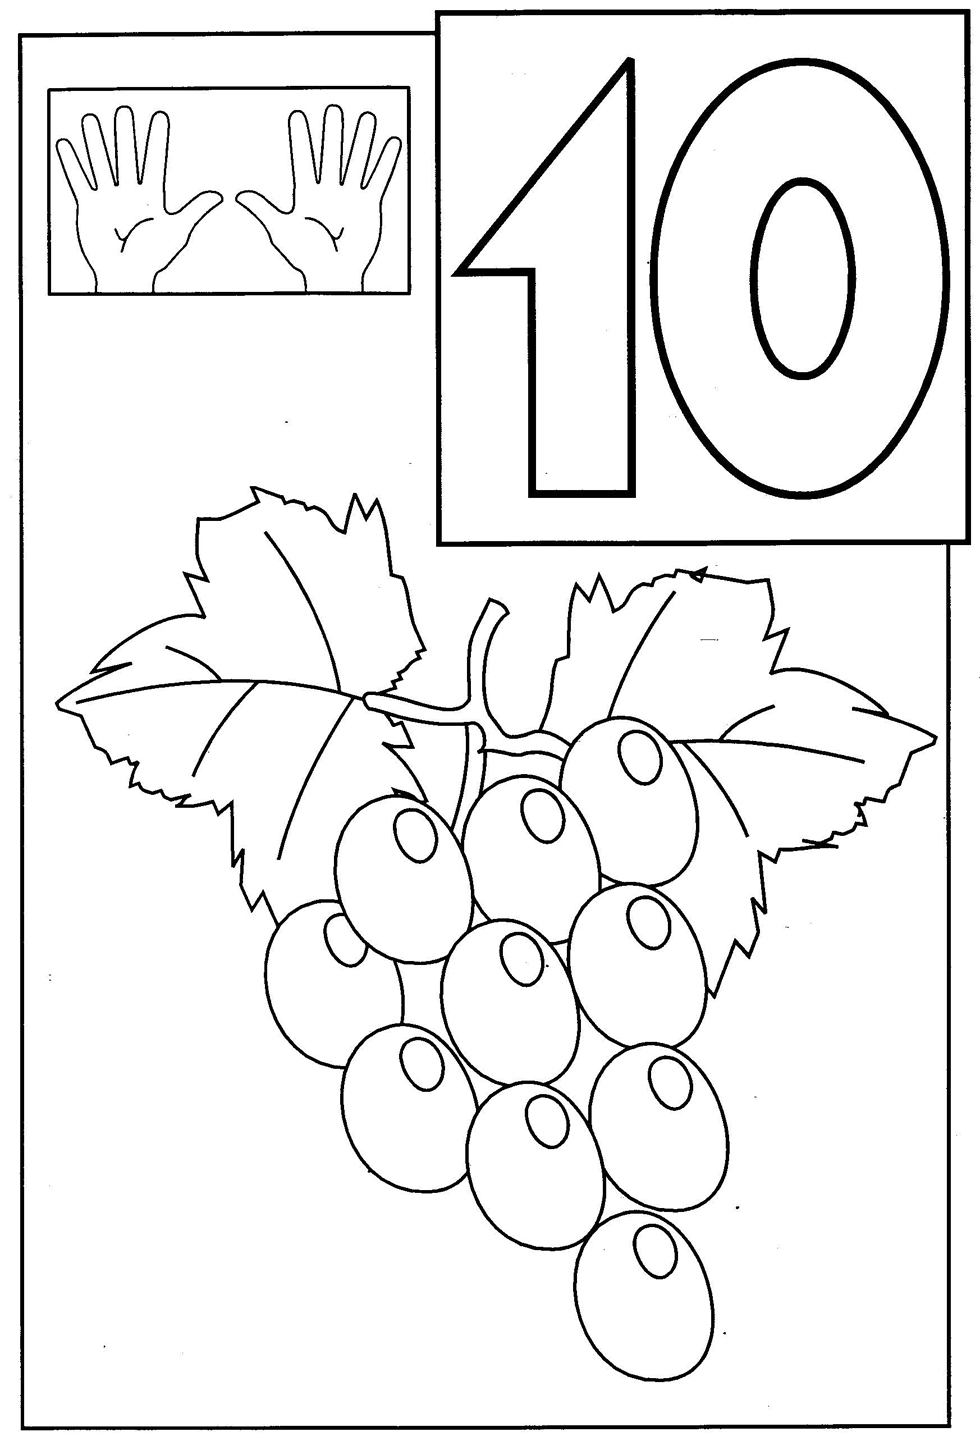  Coloring Activities For Toddlers 5